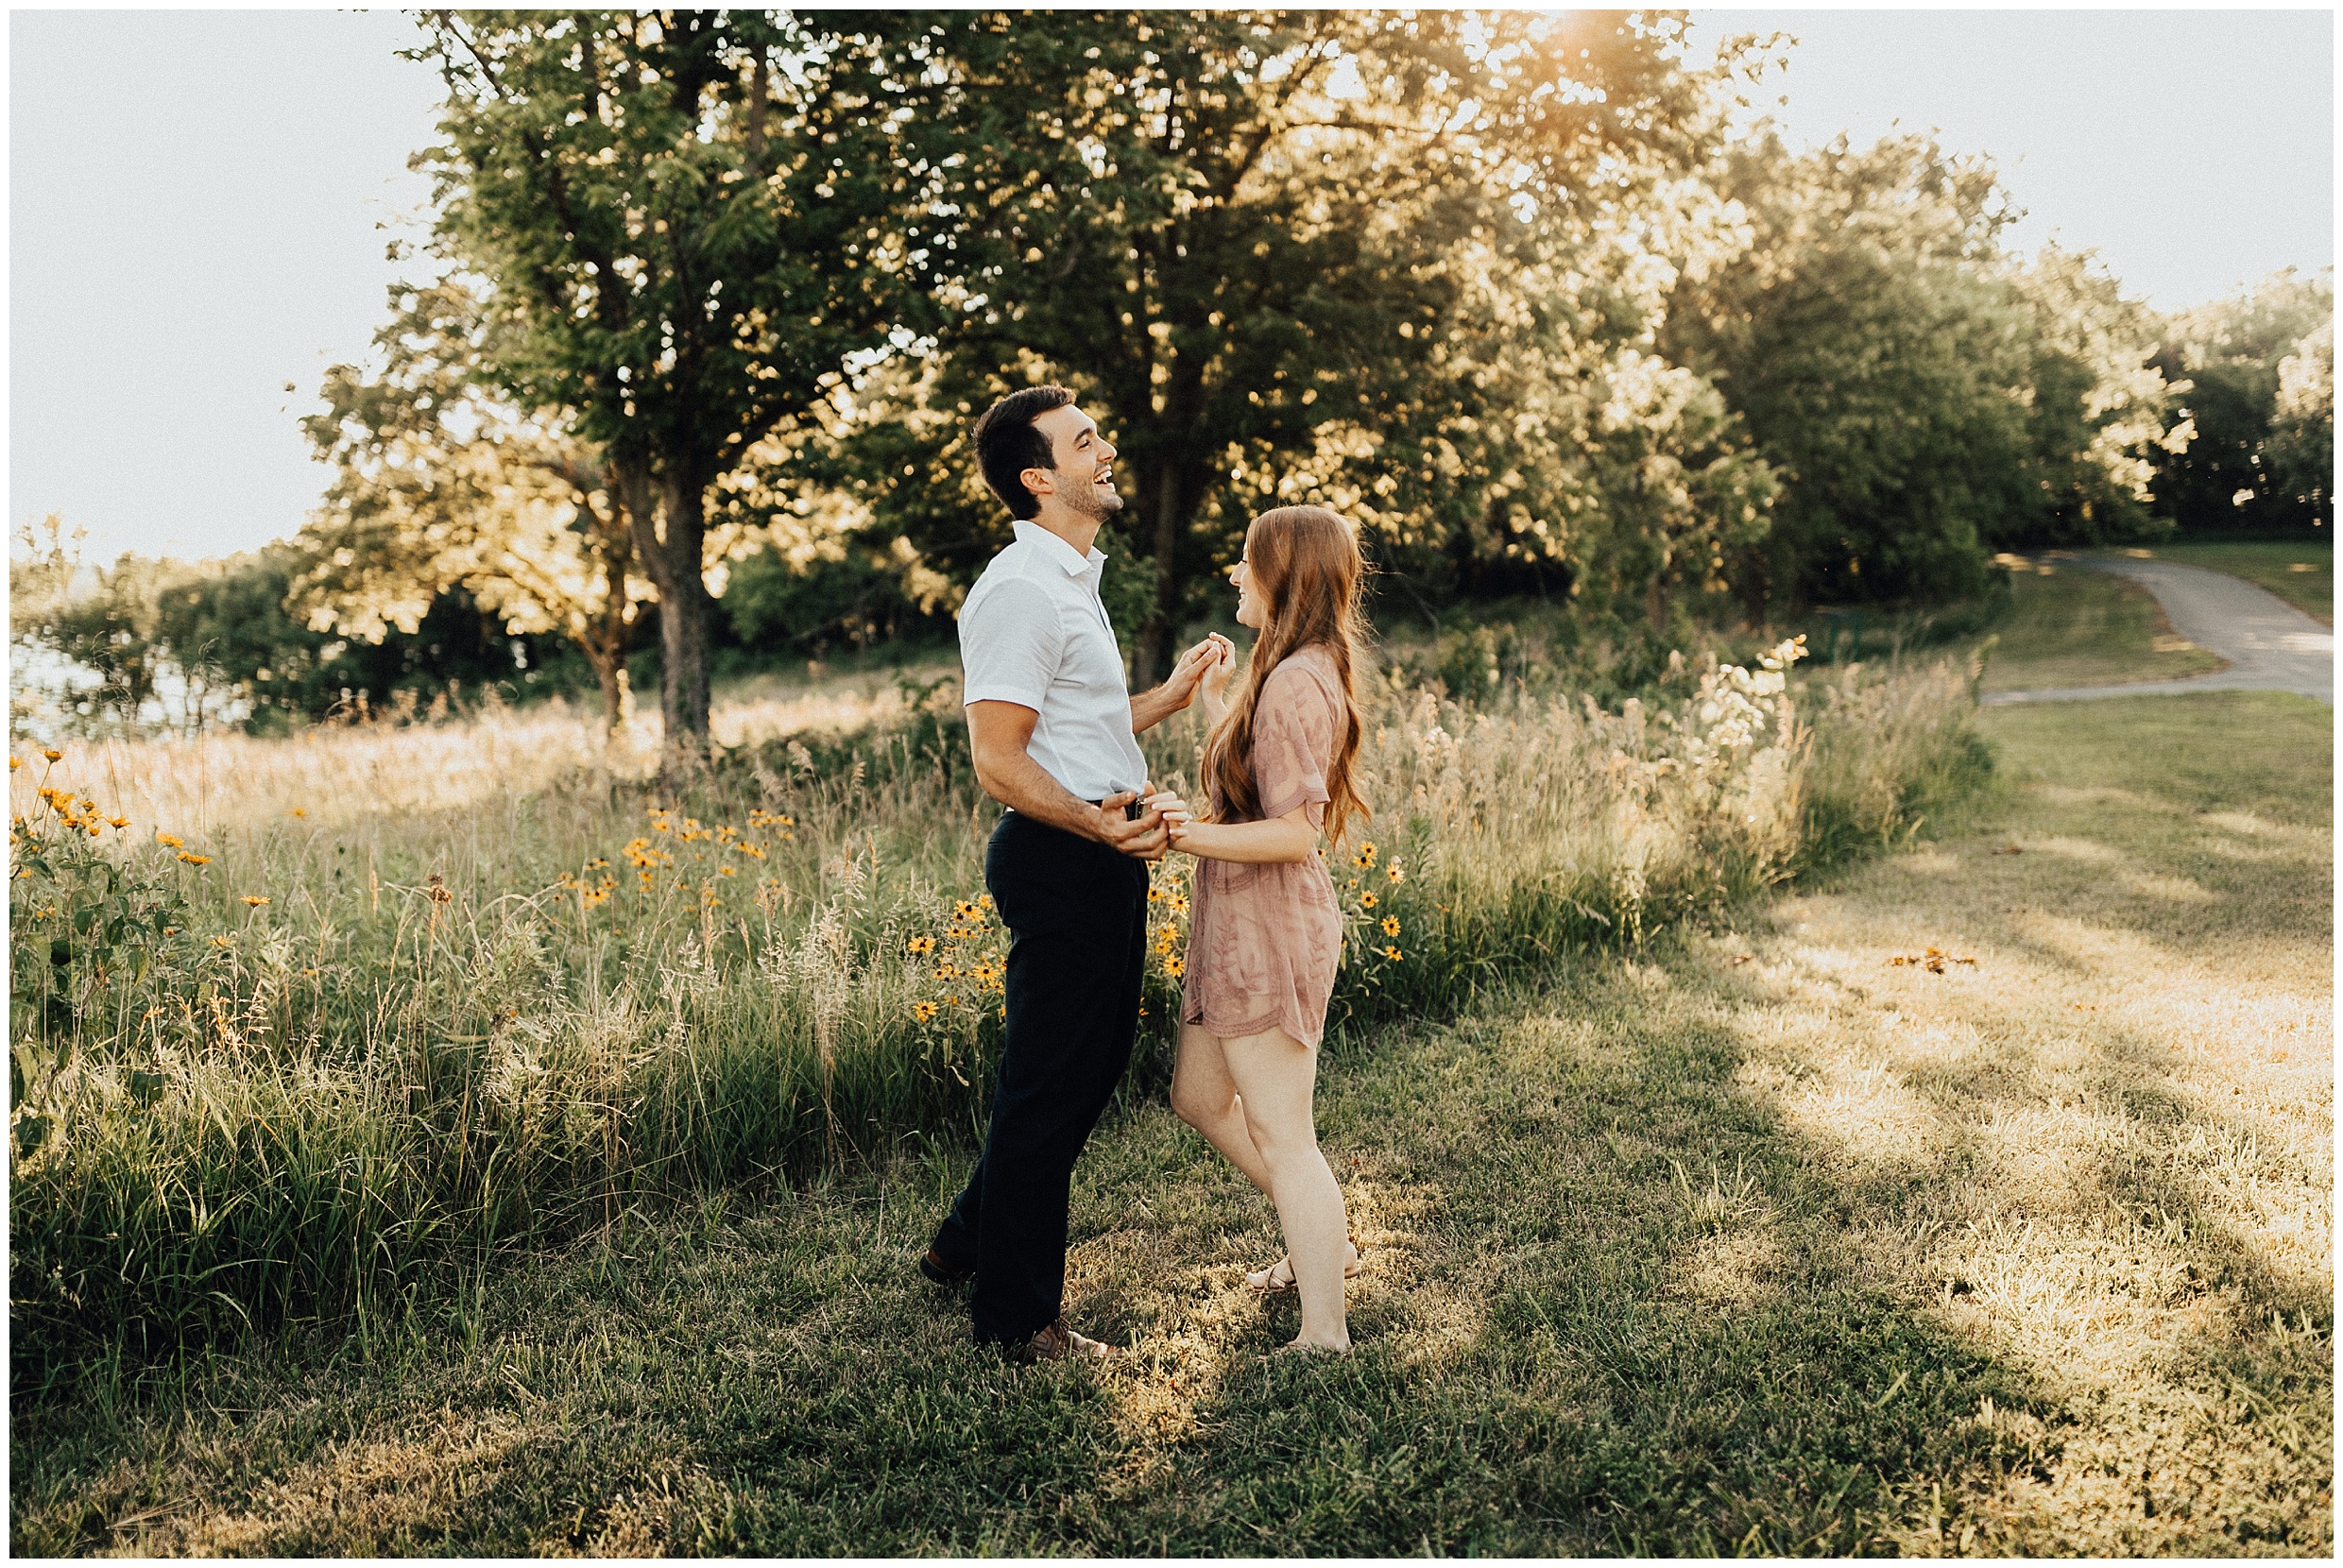 Engagement photos, what to wear for engagement session, save the date, couples posing, engagement photo ideas, Kansas City engagement photos, Kansas city engagement photographer, Smithville lake engagement session